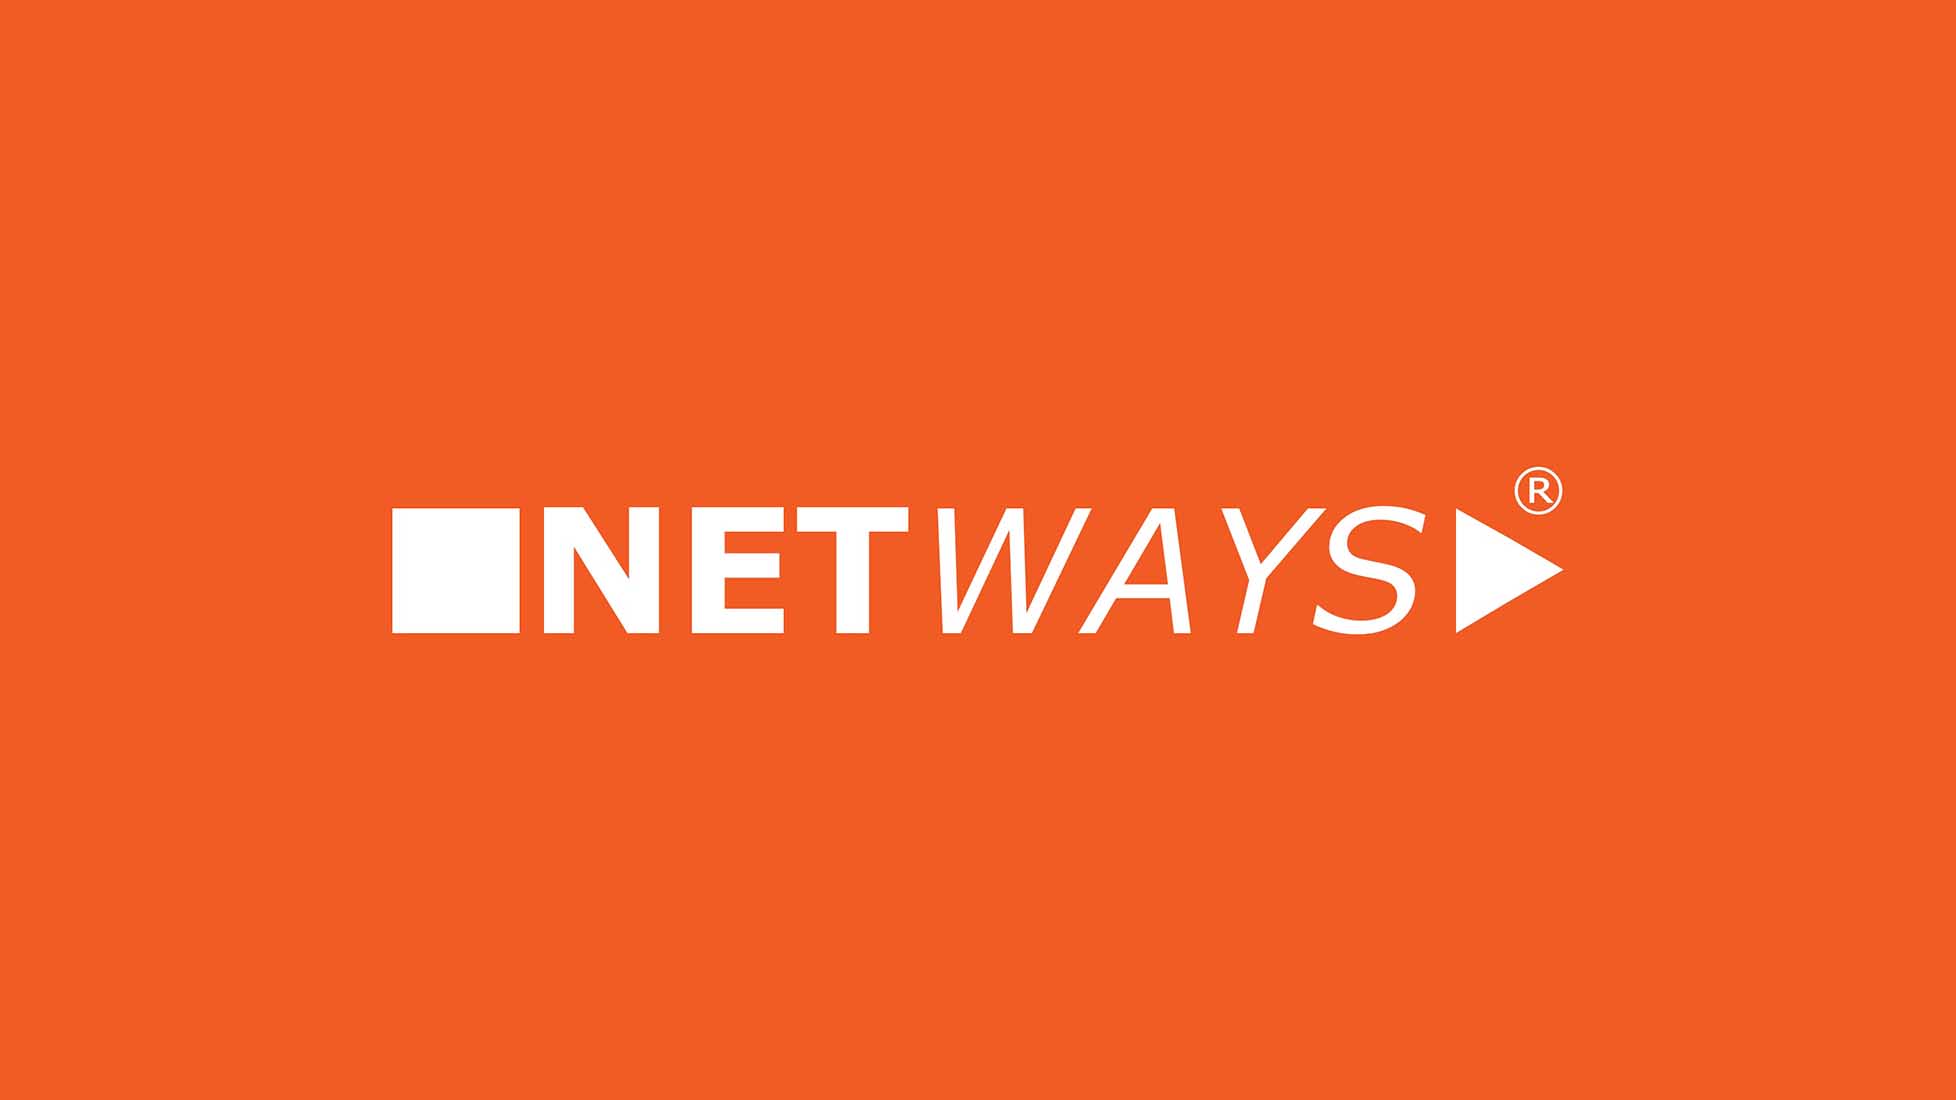 Netways uses Mesos to run large scale workloads